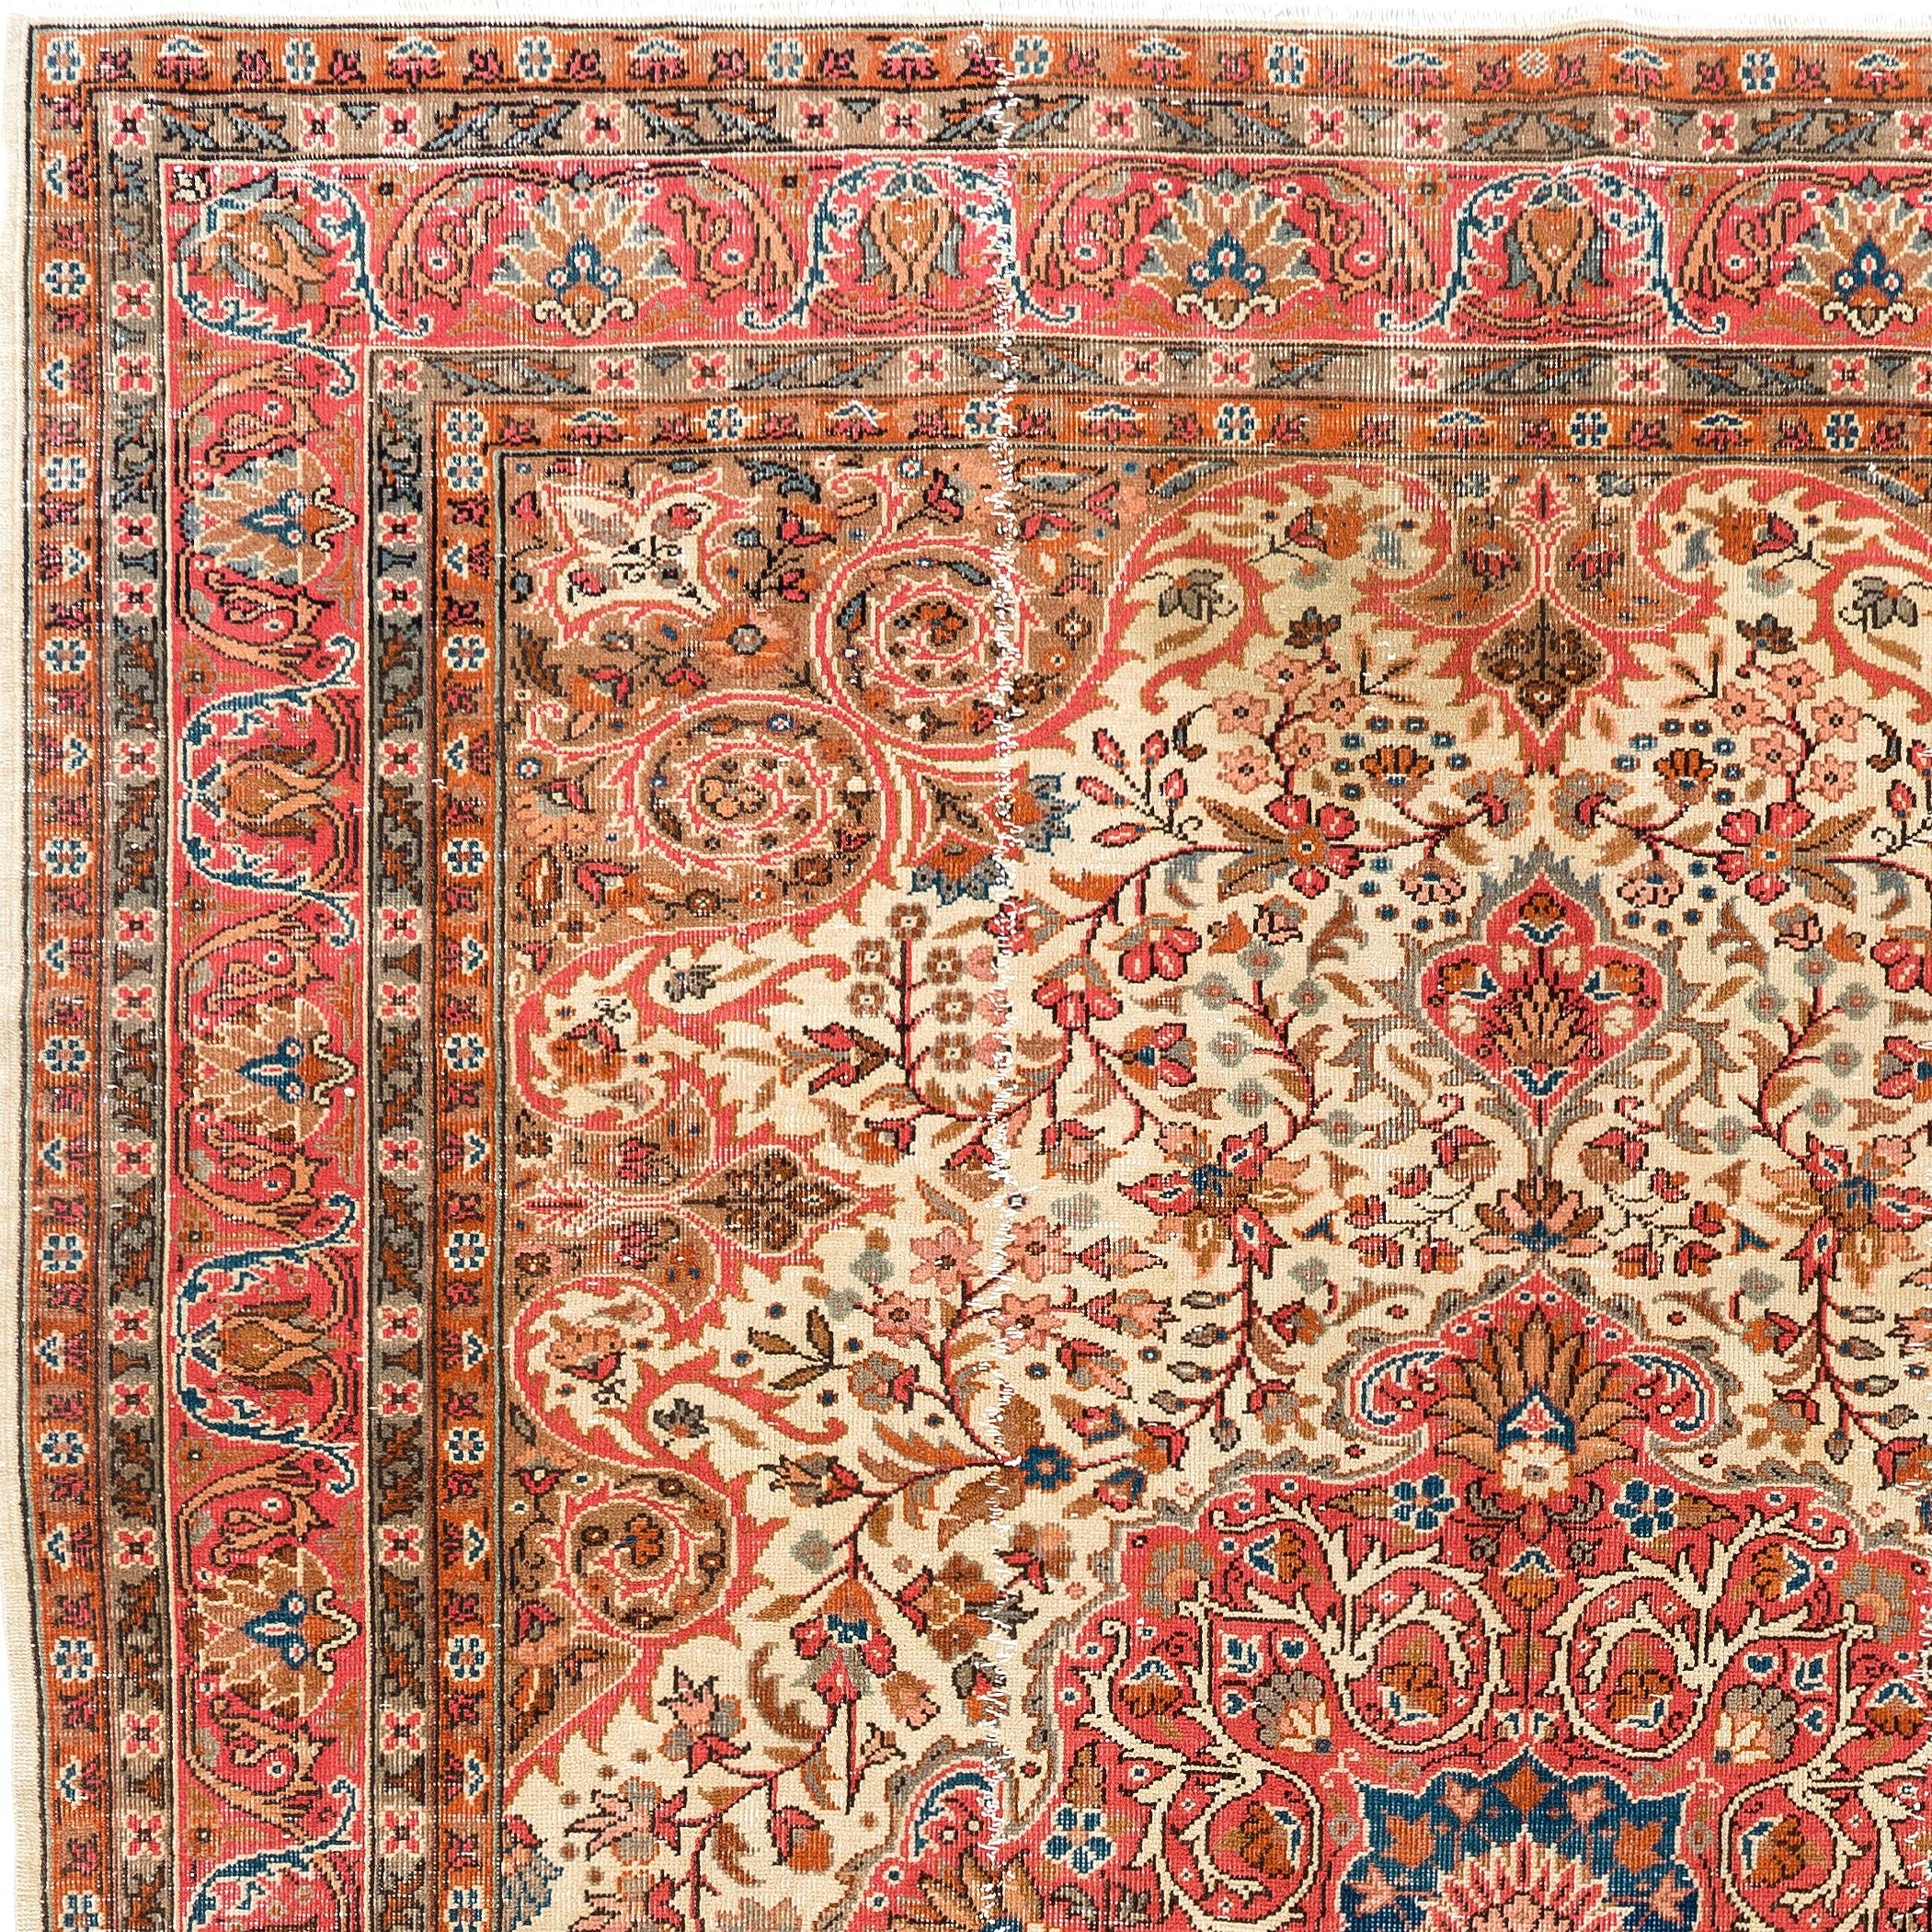 A finely hand-knotted vintage Central Anatolian rug with a classic garden design with flowers, spandrels, blossoms, leaves and branches. Size: 8 x 11 Ft.
Wool pile on a tightly woven strong cotton foundation, very good condition.
It has been washed